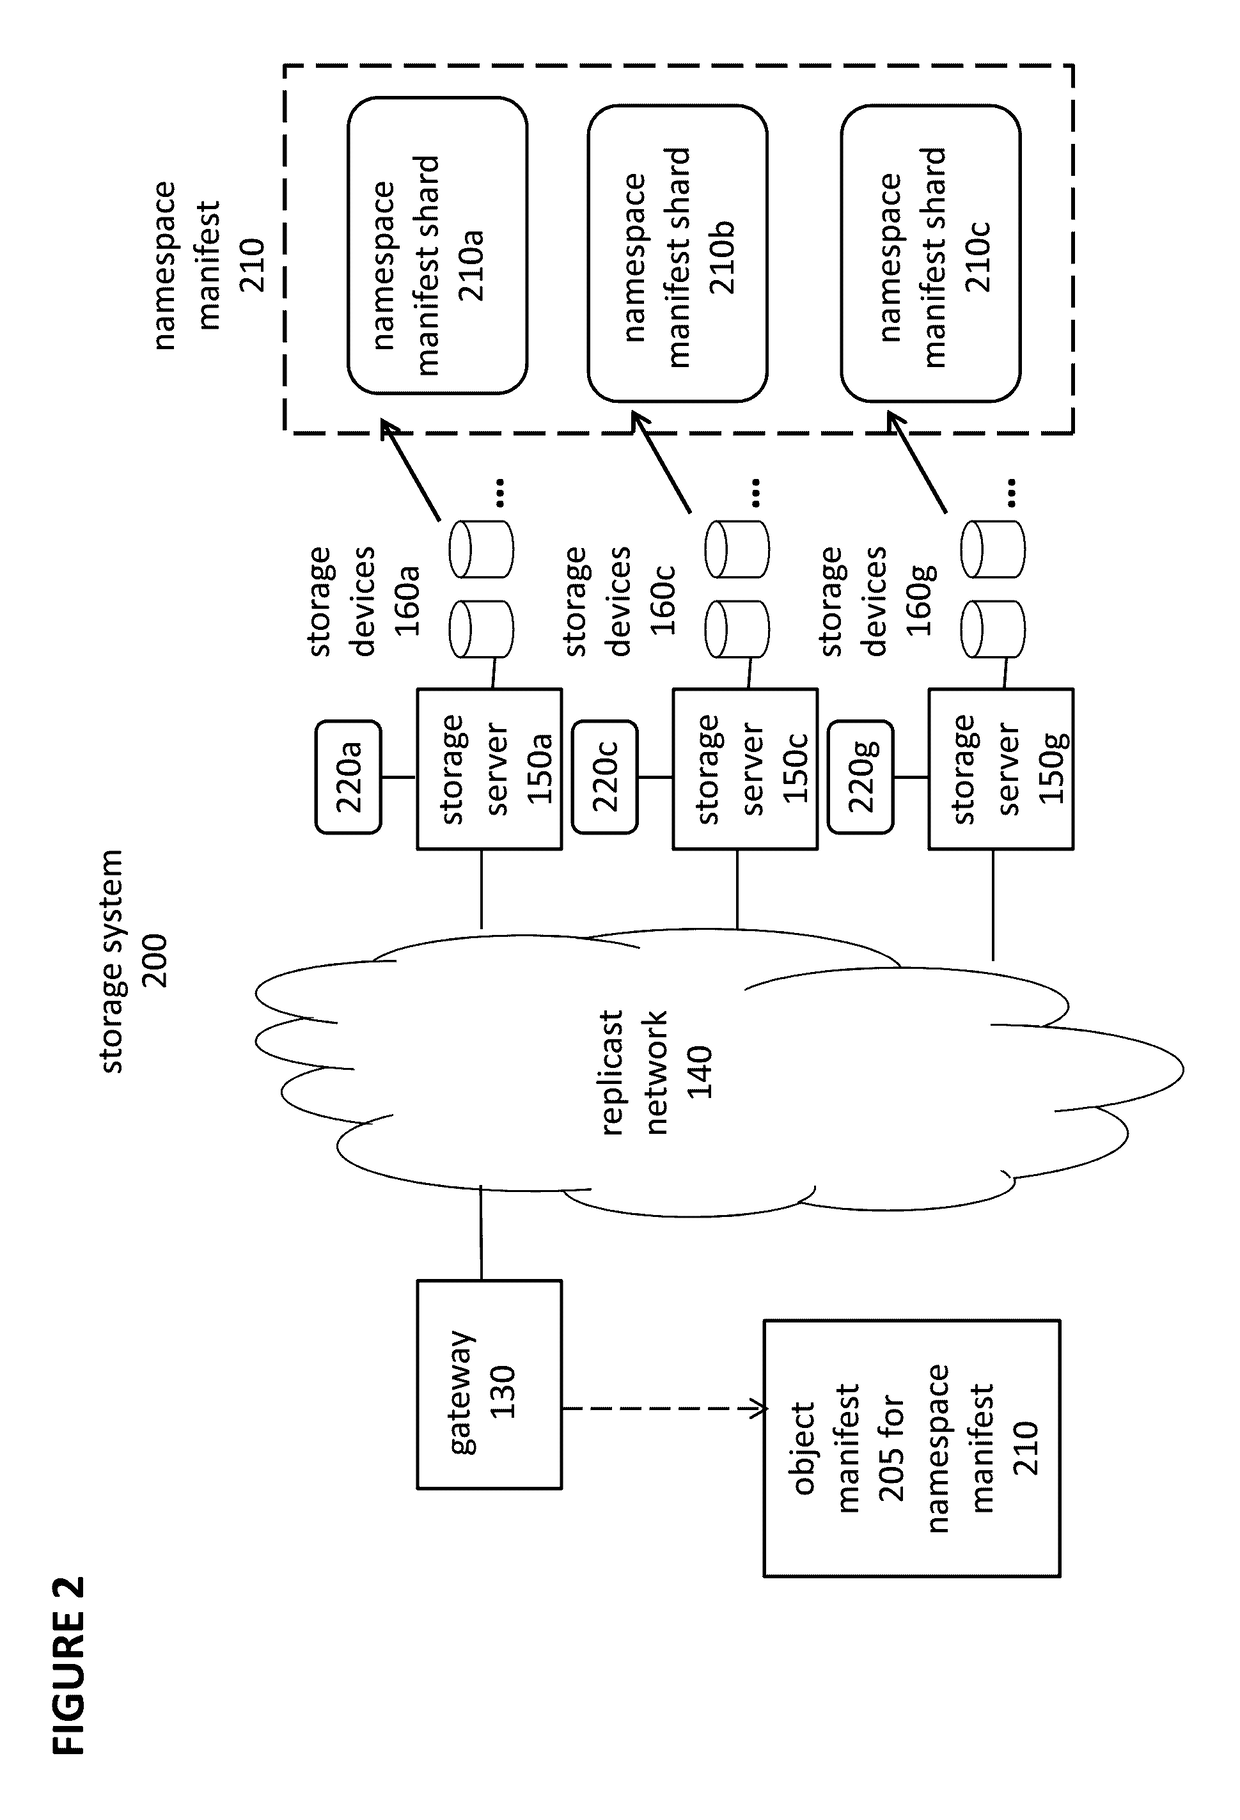 Object Storage System with a Distributed Namespace and Snapshot and Cloning Features